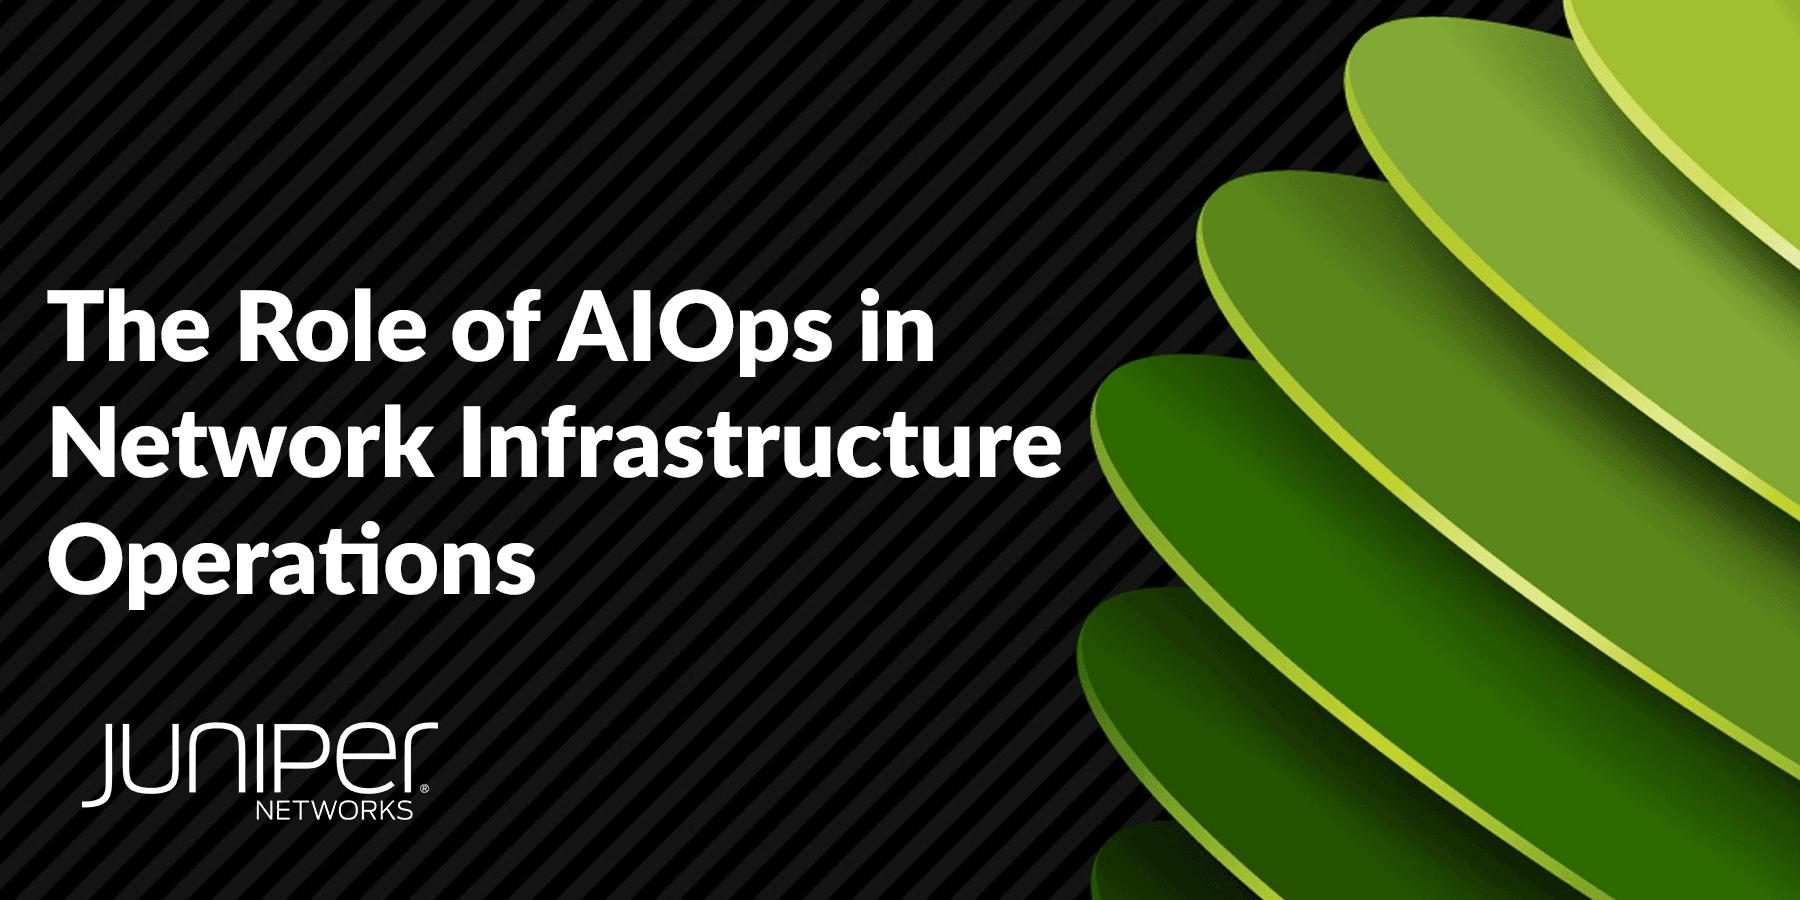 The Role of AIOps in Network Infrastructure Operations